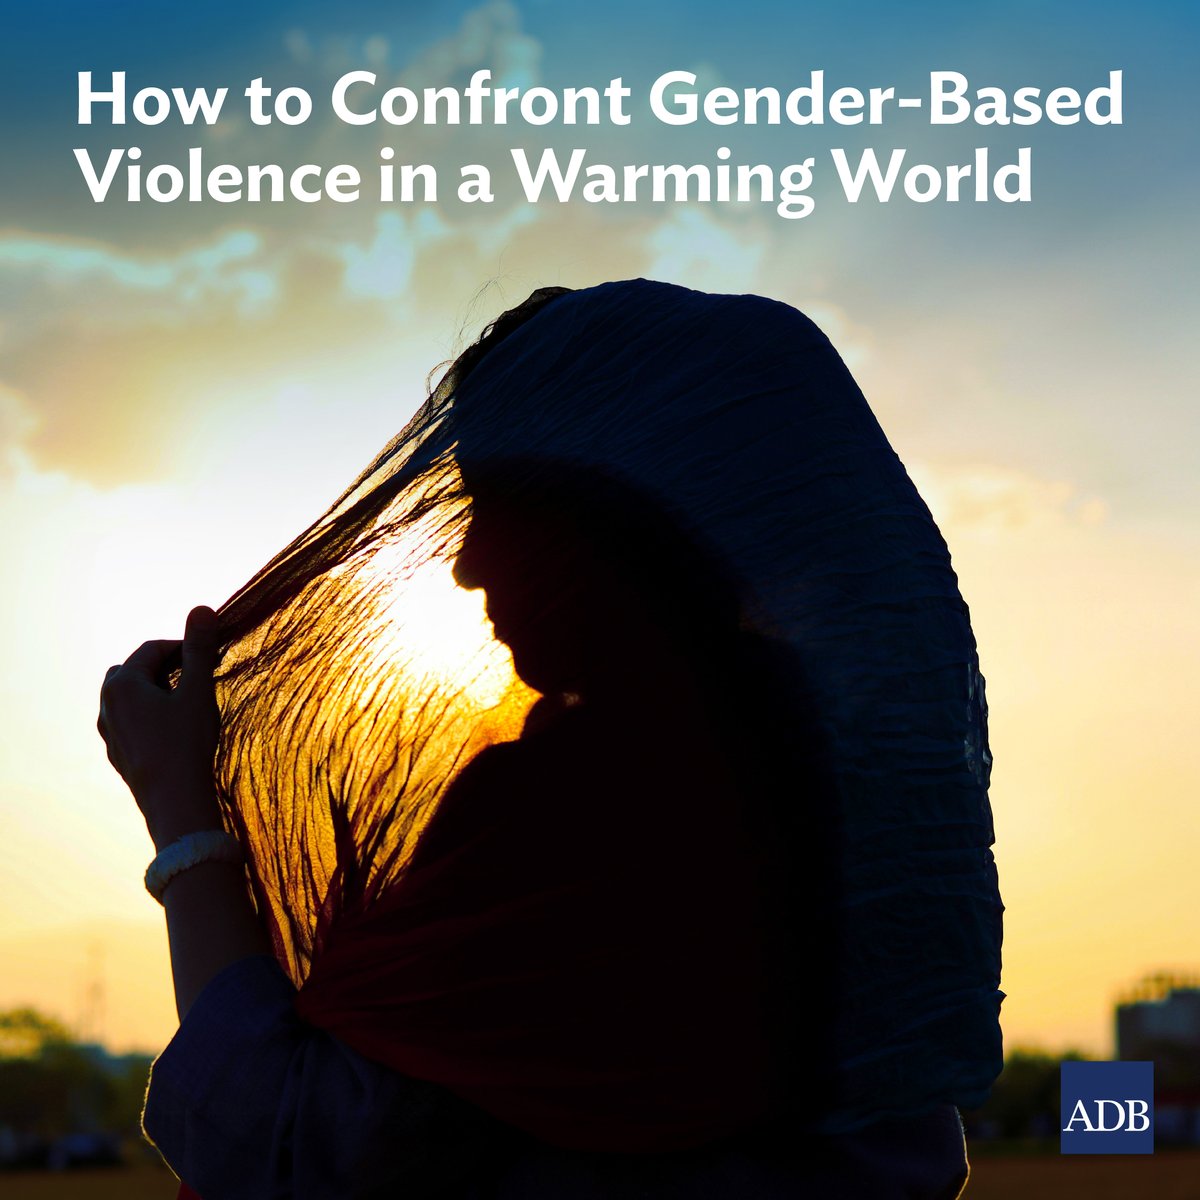 Women and girls are facing risks from extreme heat and violence triggered by increasing temperatures and fueled by patriarchal norms. By focusing on climate change adaptation and resilience, we can lay the groundwork for a safer future for all: ow.ly/pcFS50RA6Cx